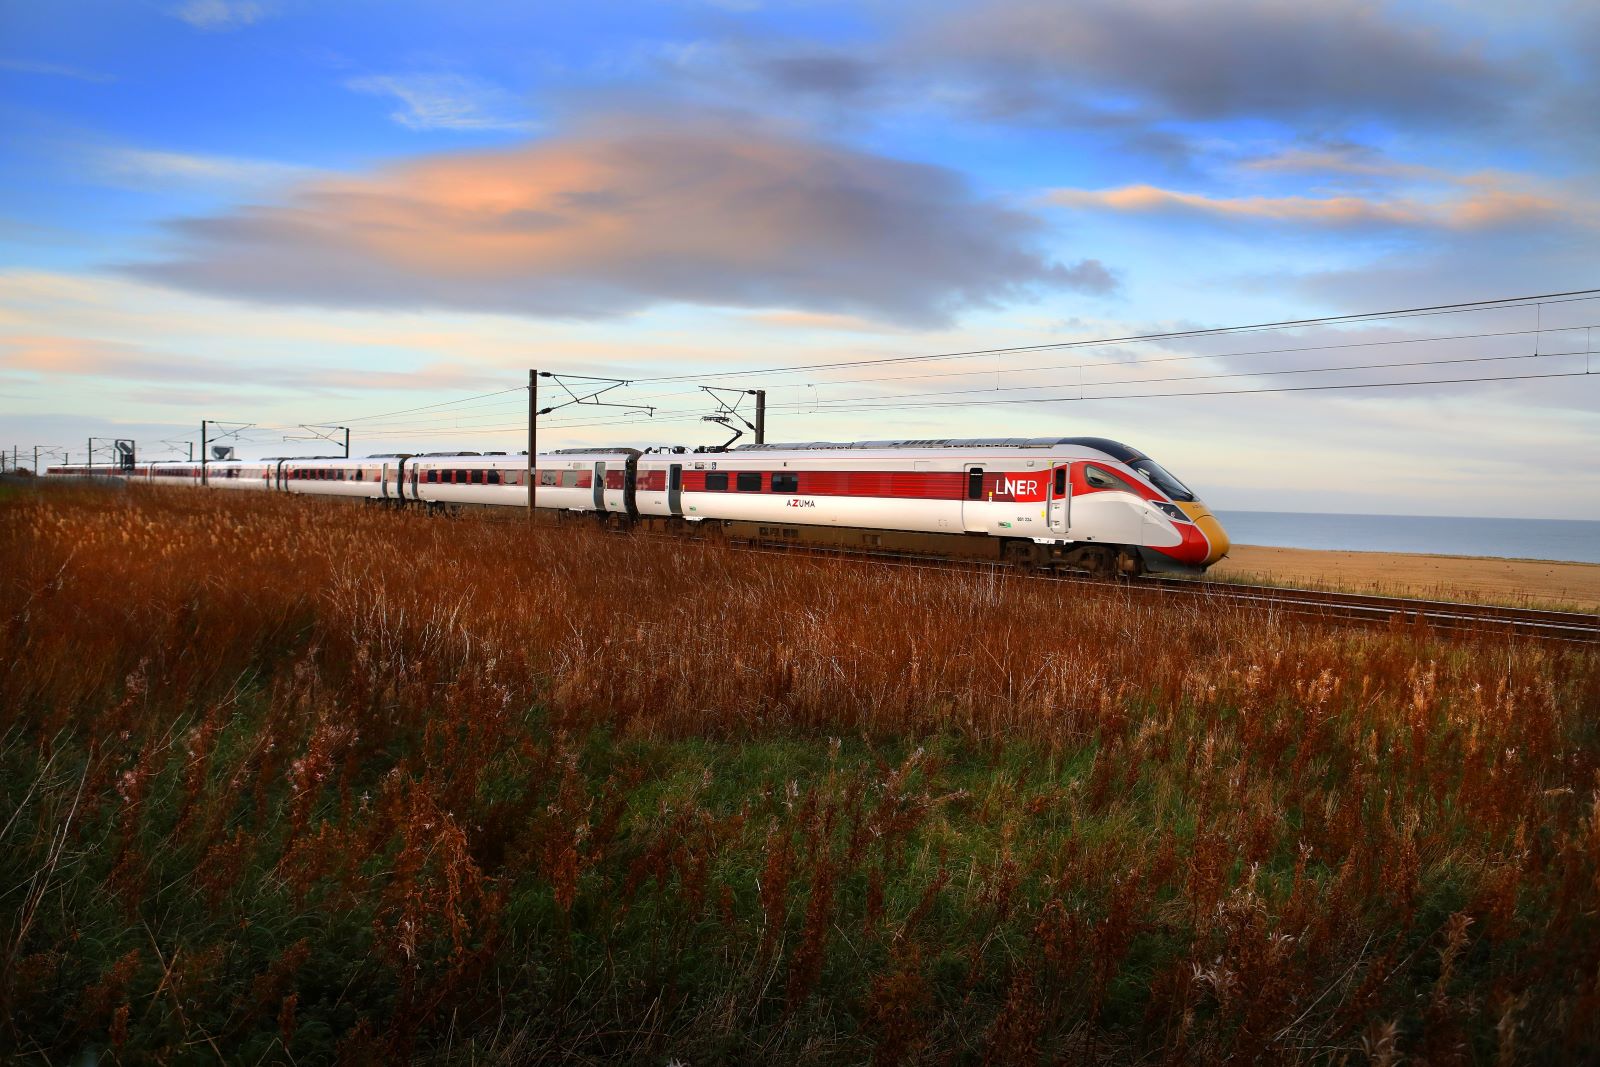 Communities Encouraged To Apply For Share Of LNER Funding